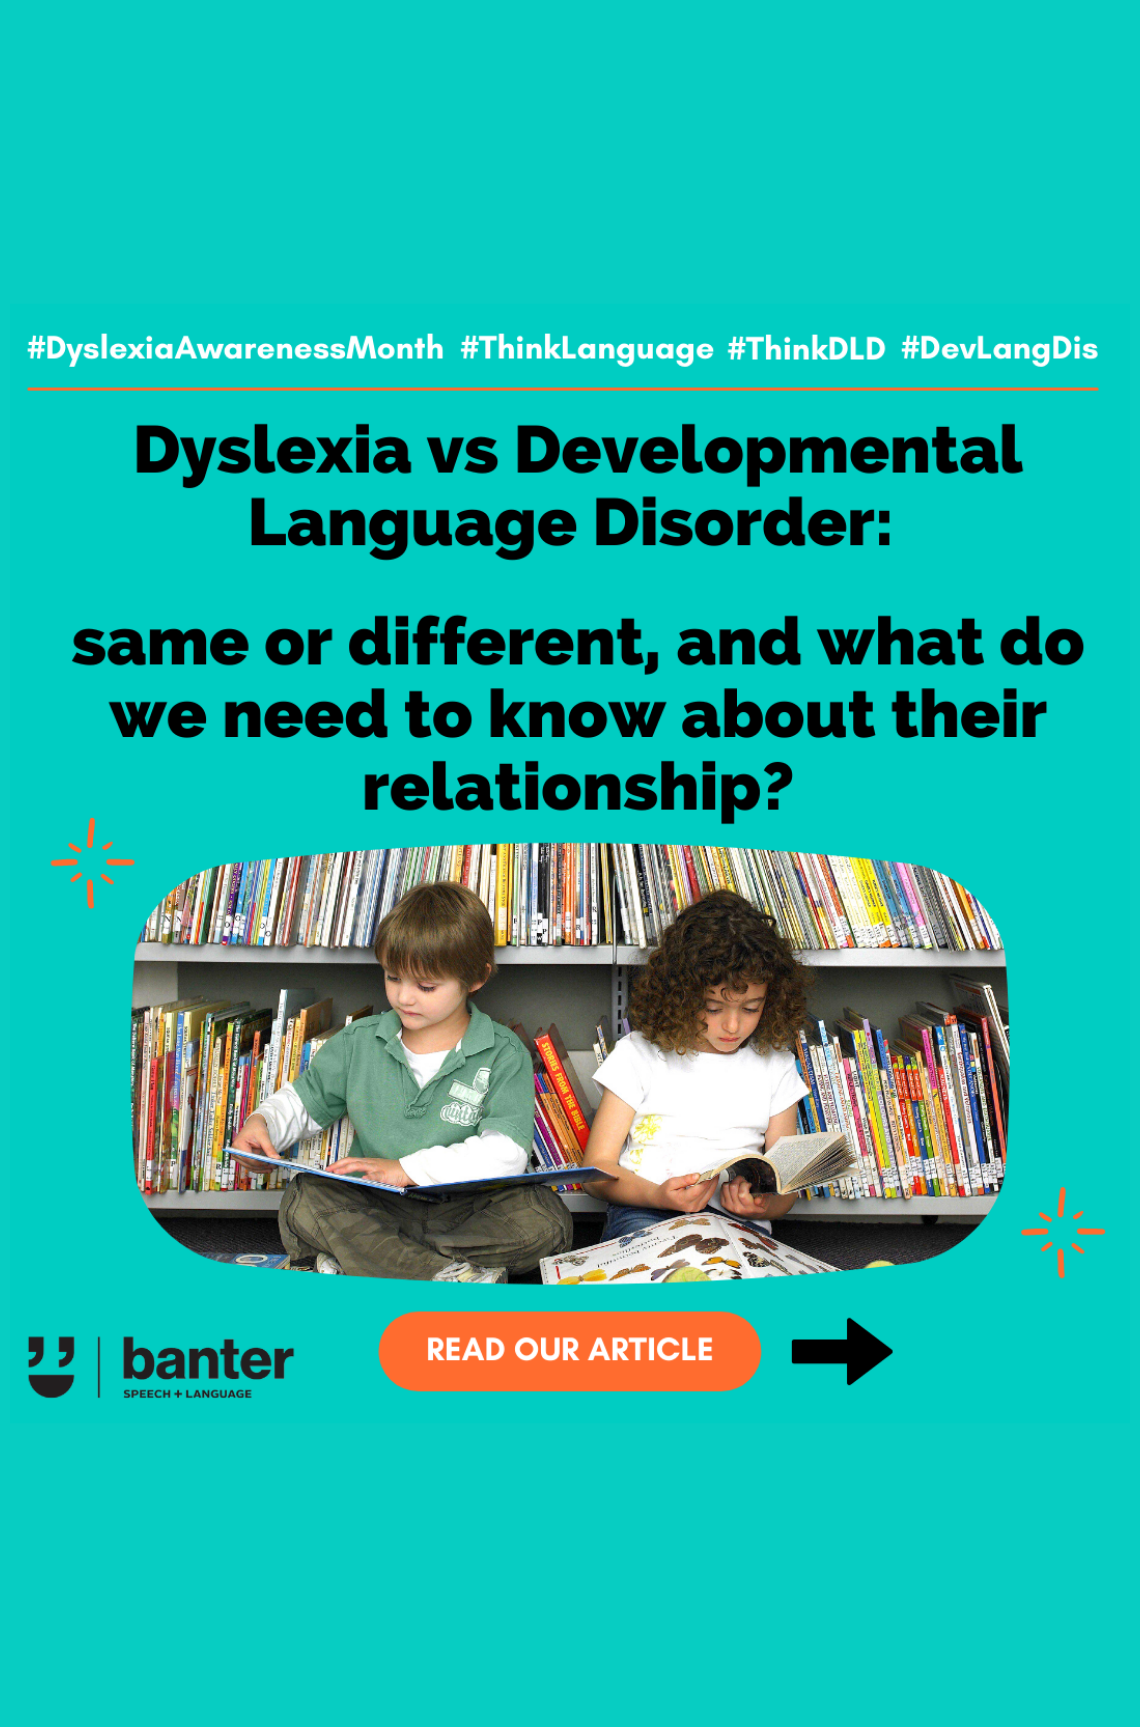 Dyslexia vs Developmental Language Disorder: same or different, and what do we need to know about their relationship?